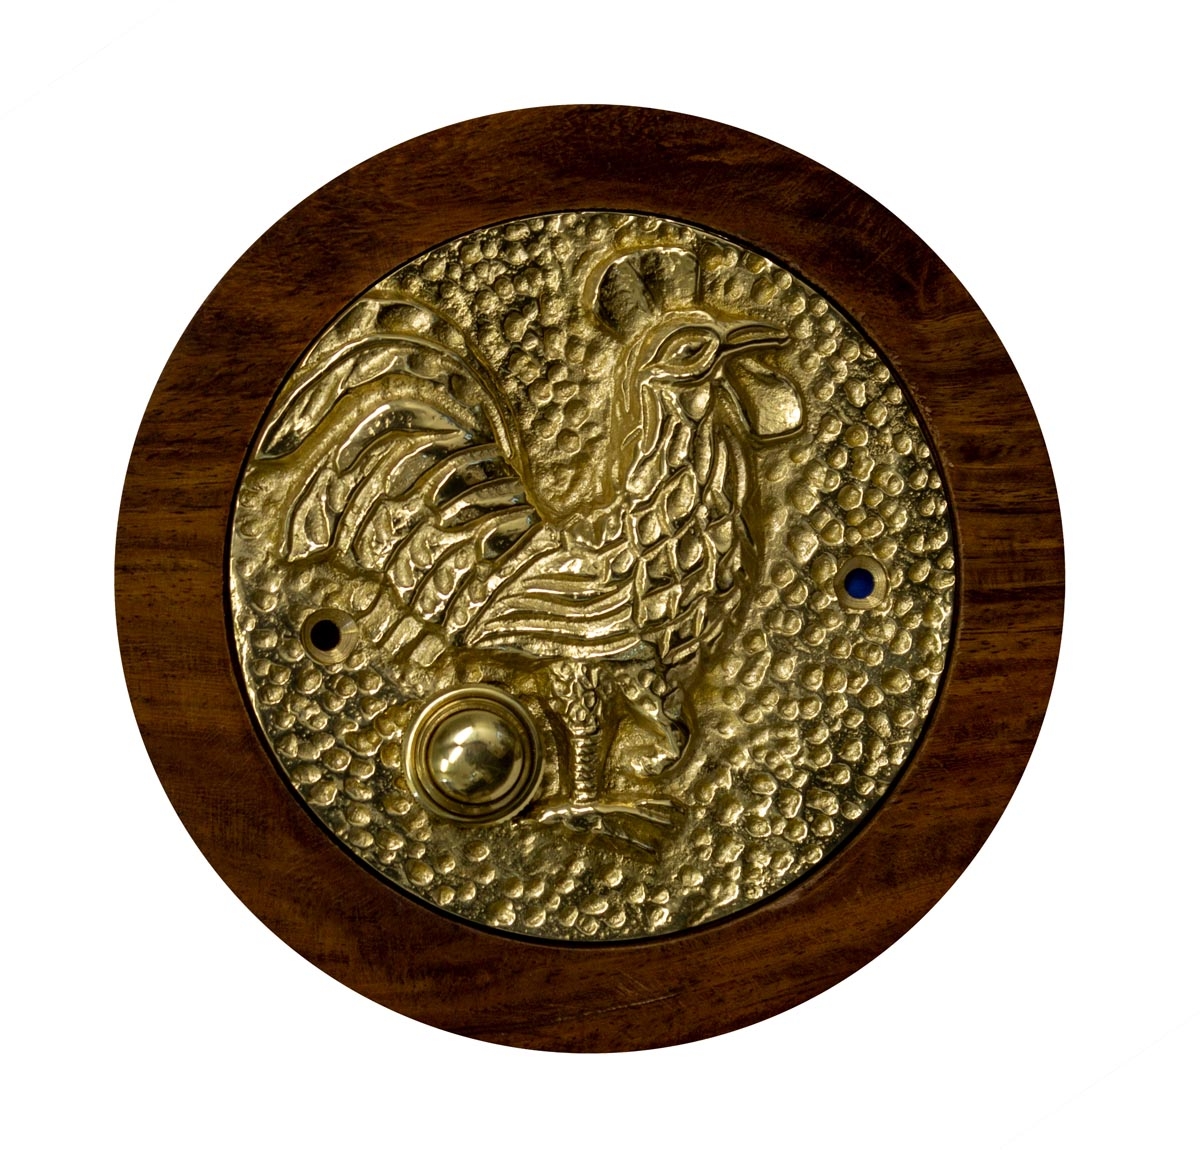 Polished Brass Rooster Doorbell Button